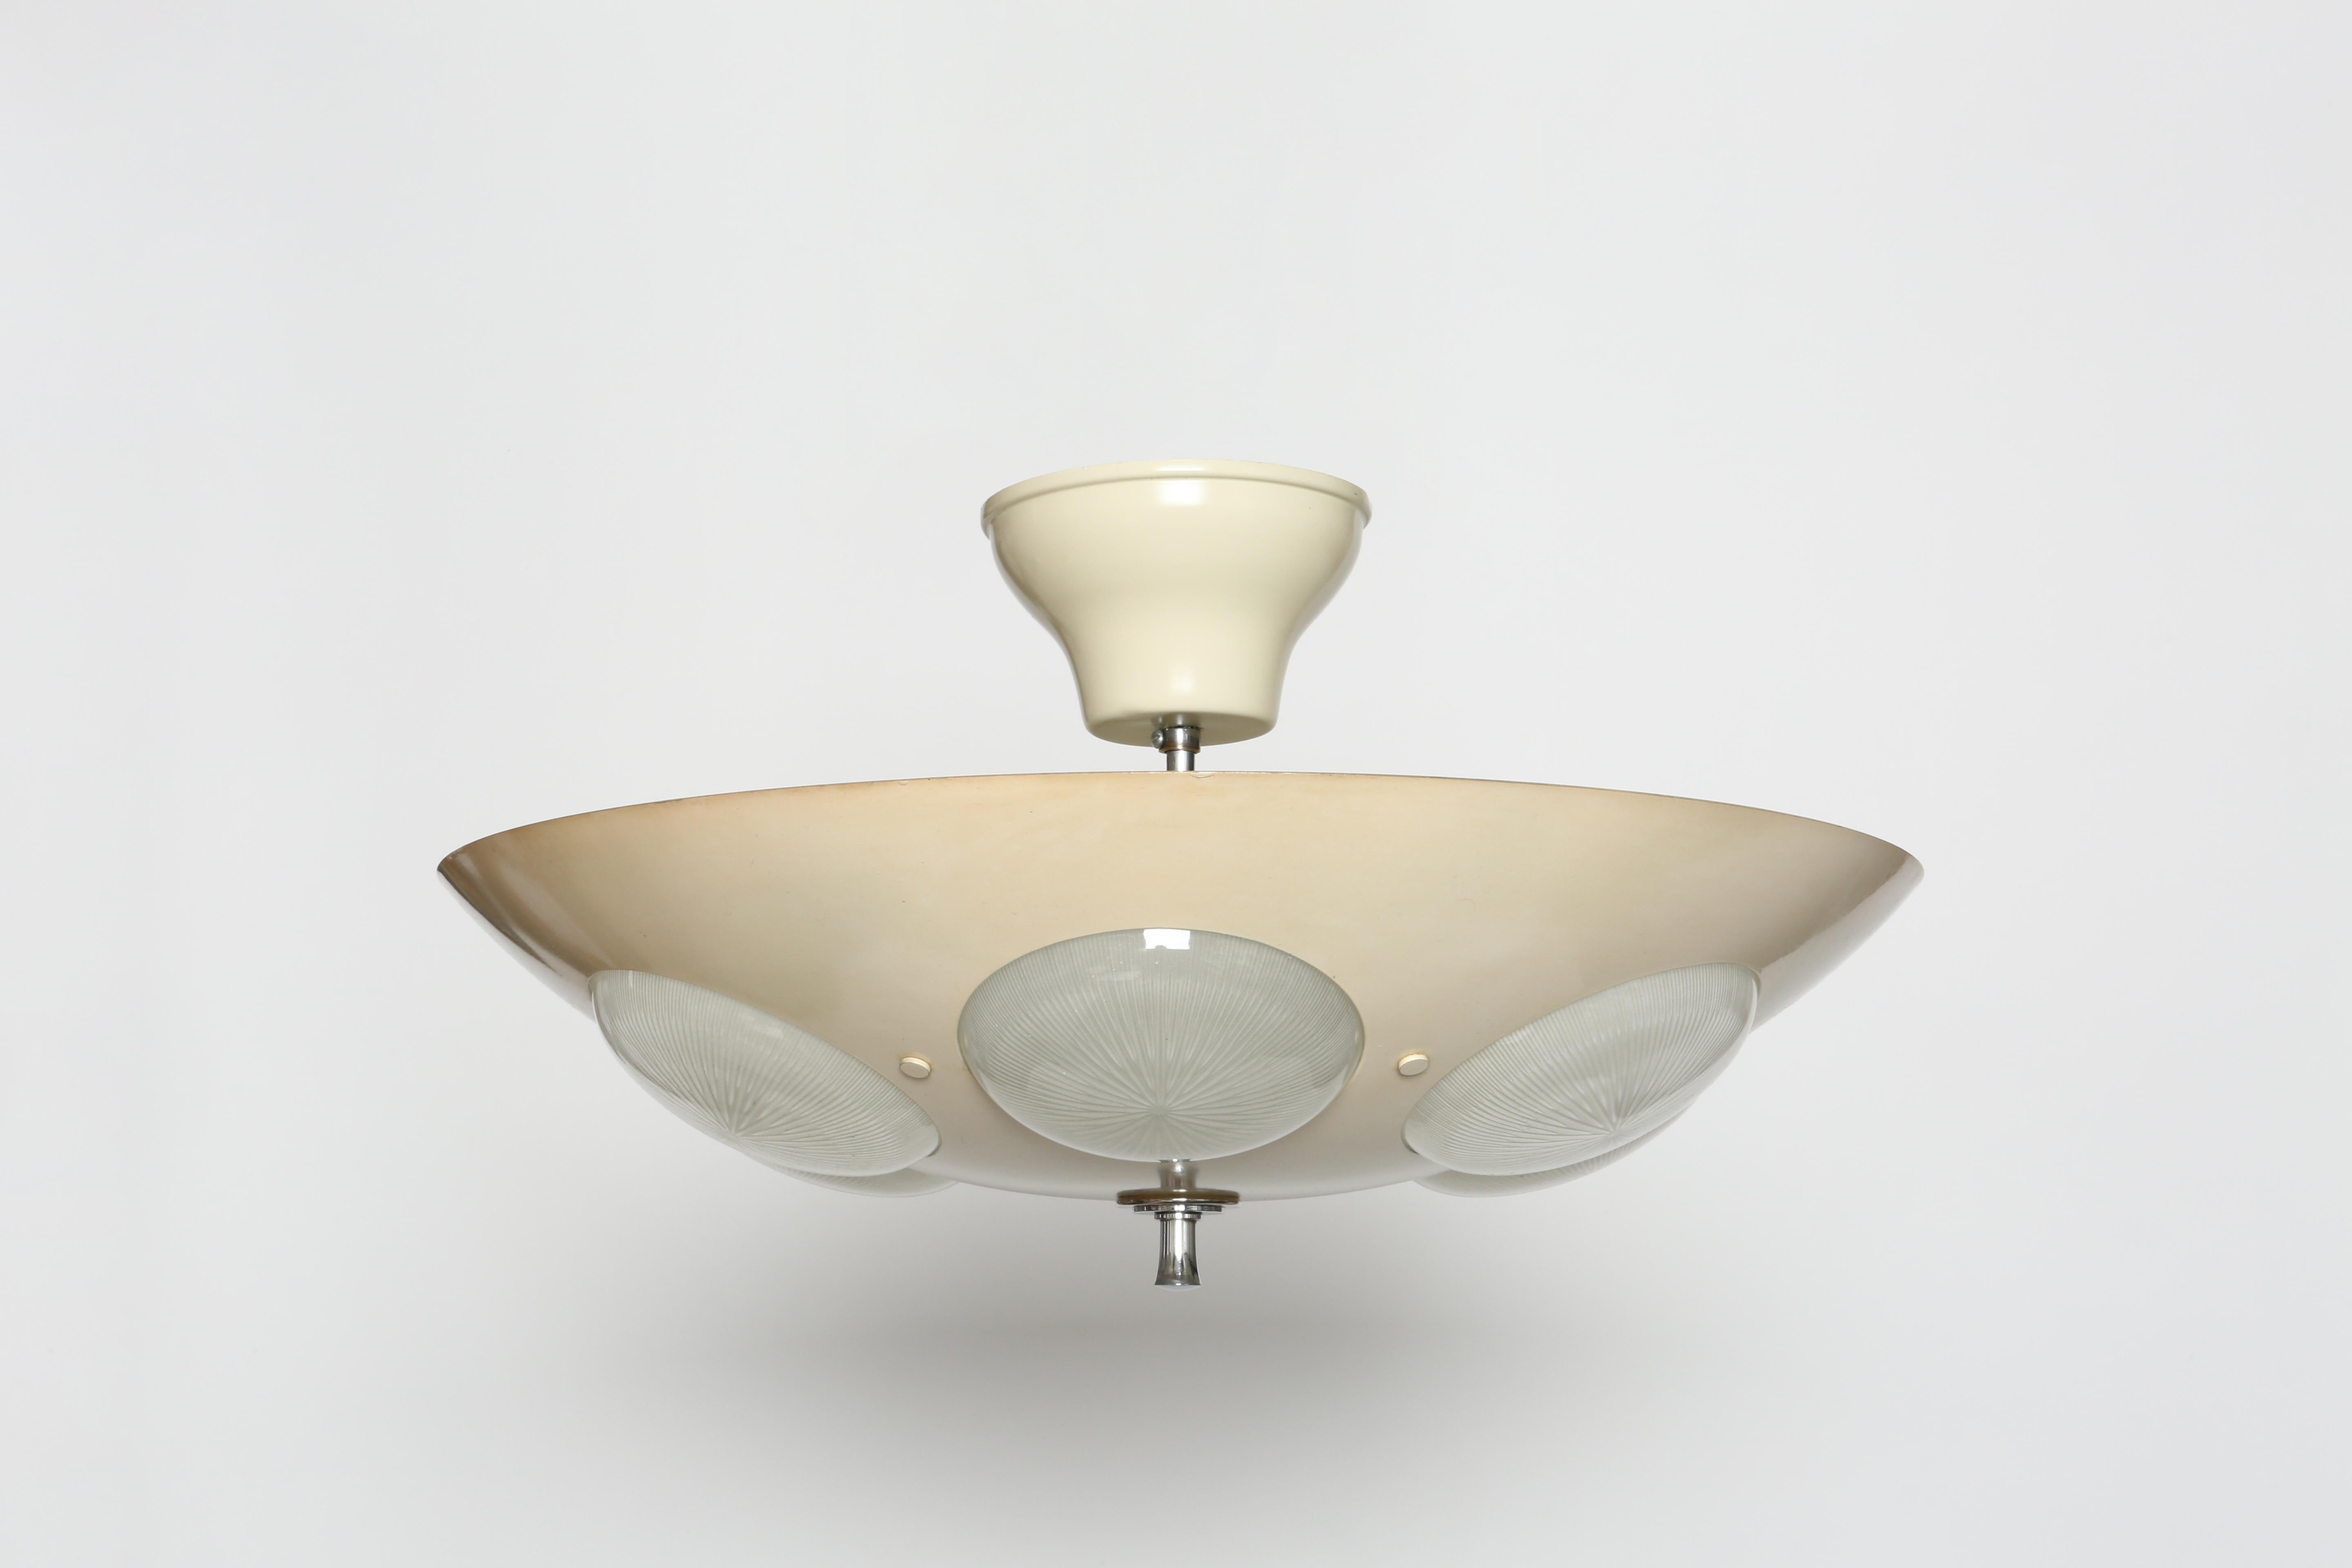 Oscar Torlasco for Lumi attributed.
Made in Italy in 1950s.
Impressive pendant made with enameled metal shade with 6 holophane glass diffusers.
4 medium base sockets.
Rewired for US.

 